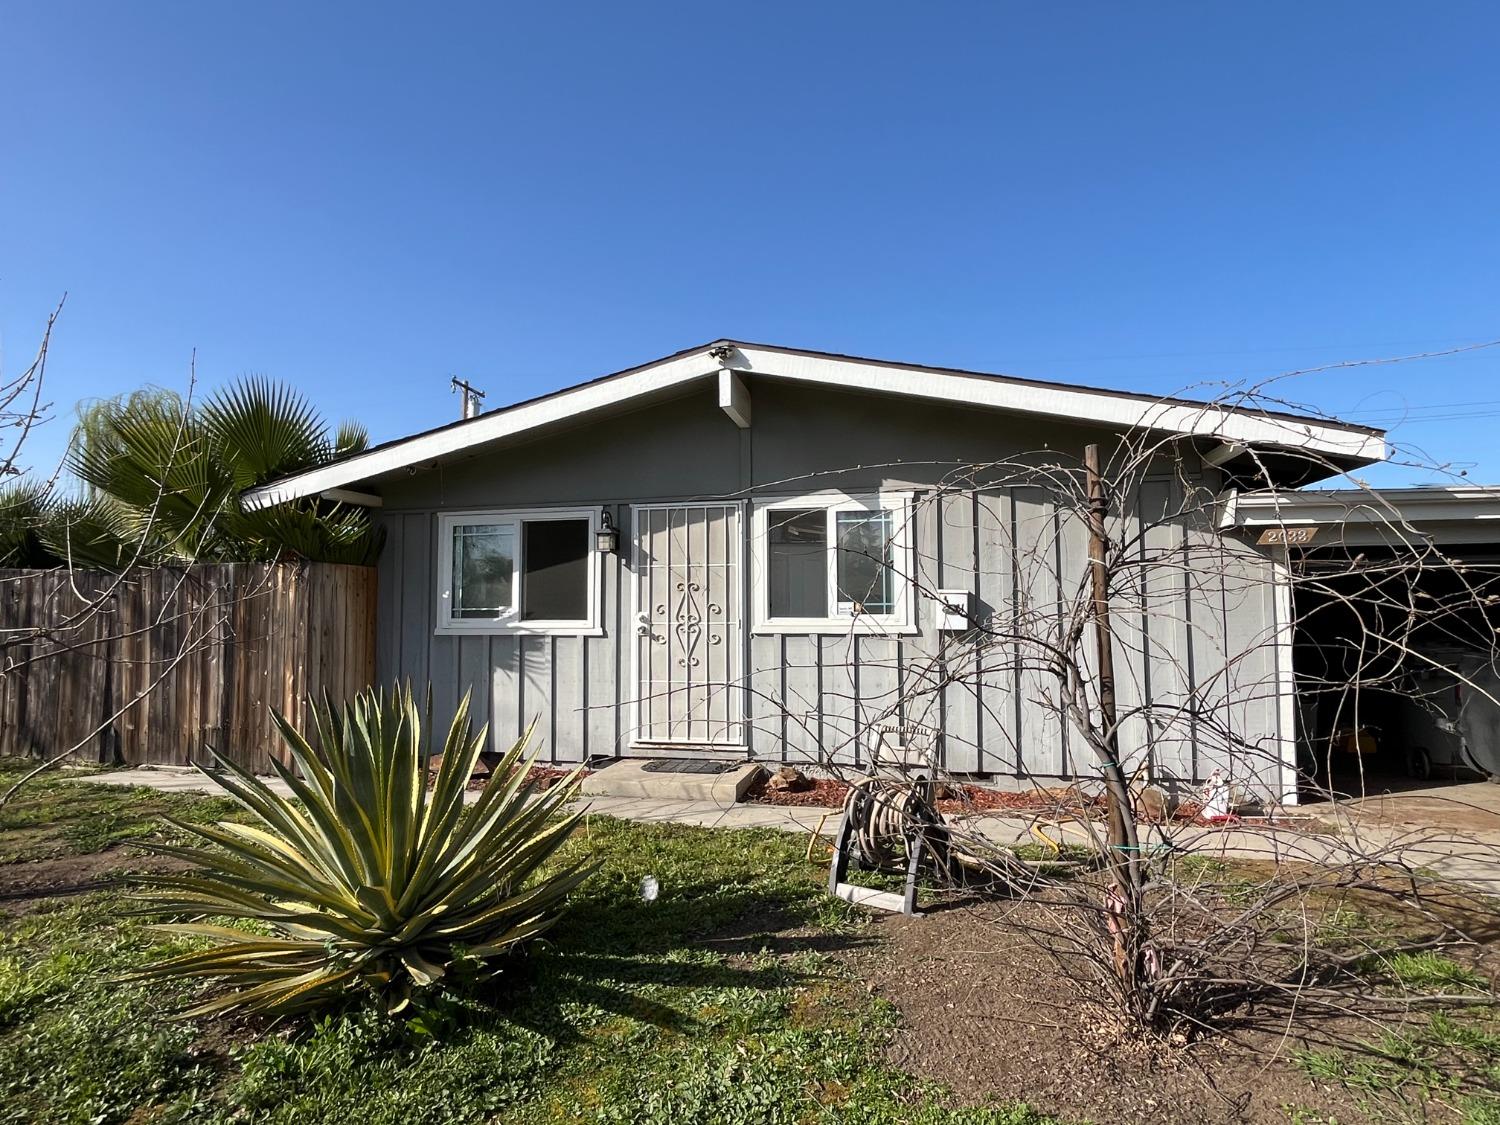 Photo of 2633 E Lansing Wy in Fresno, CA